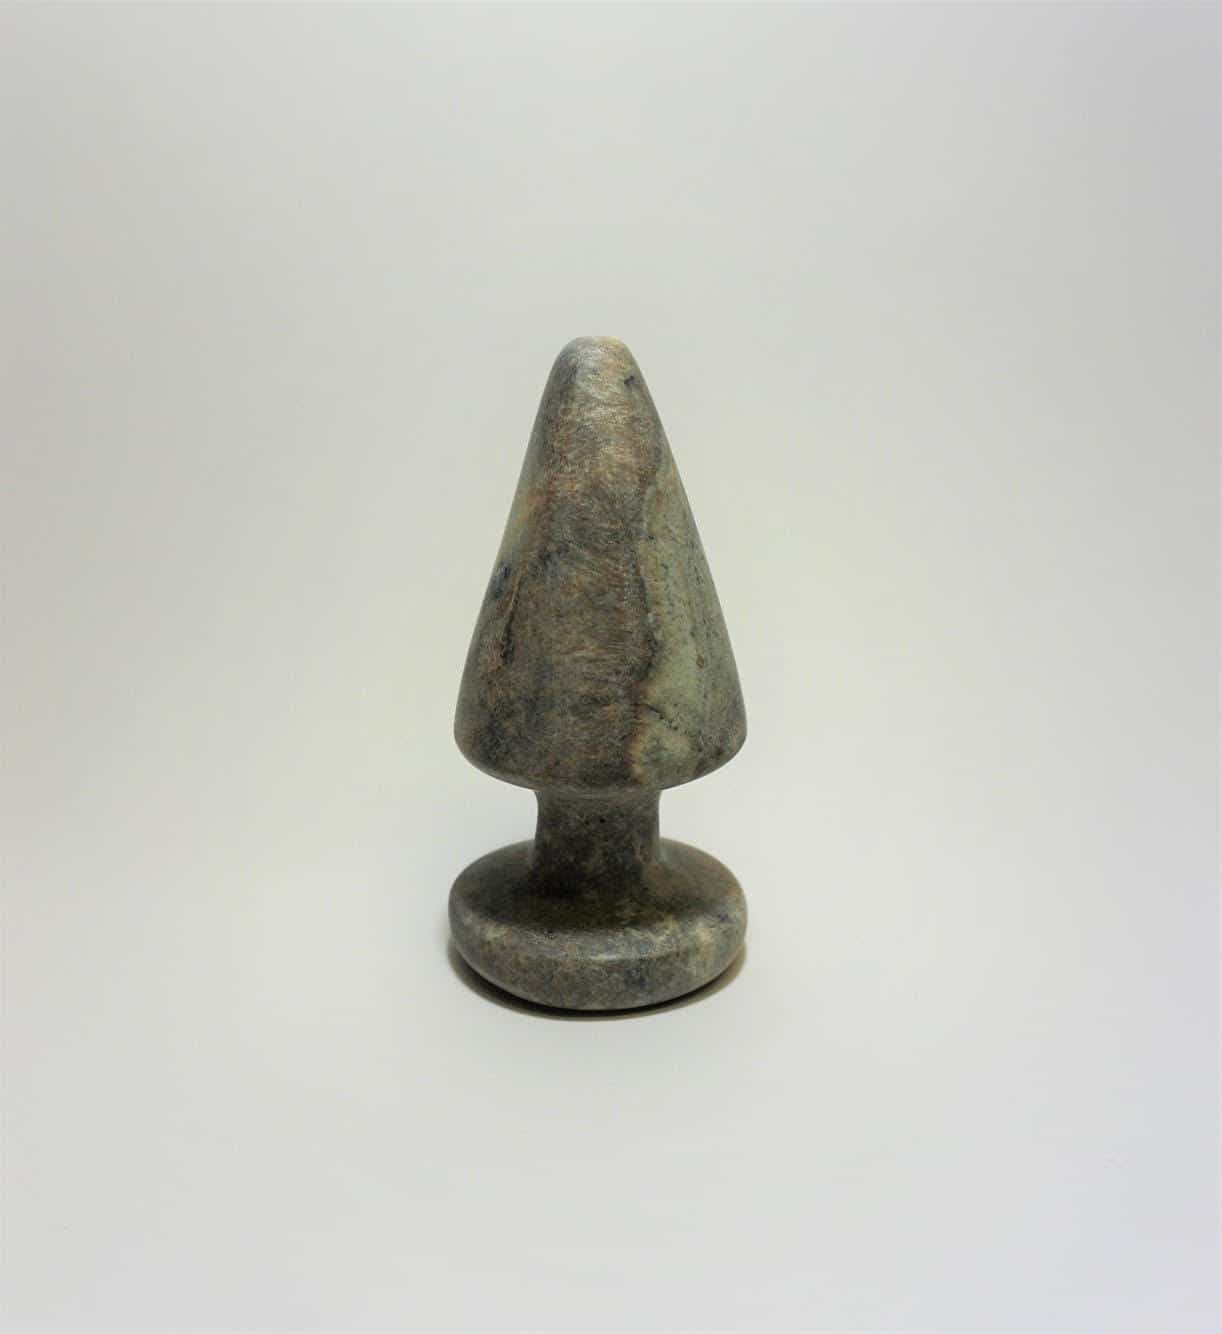 Kablusiak, Buttplug, 2018, soapstone and tung oil. Courtesy of the artist and Jarvis Hall Gallery.